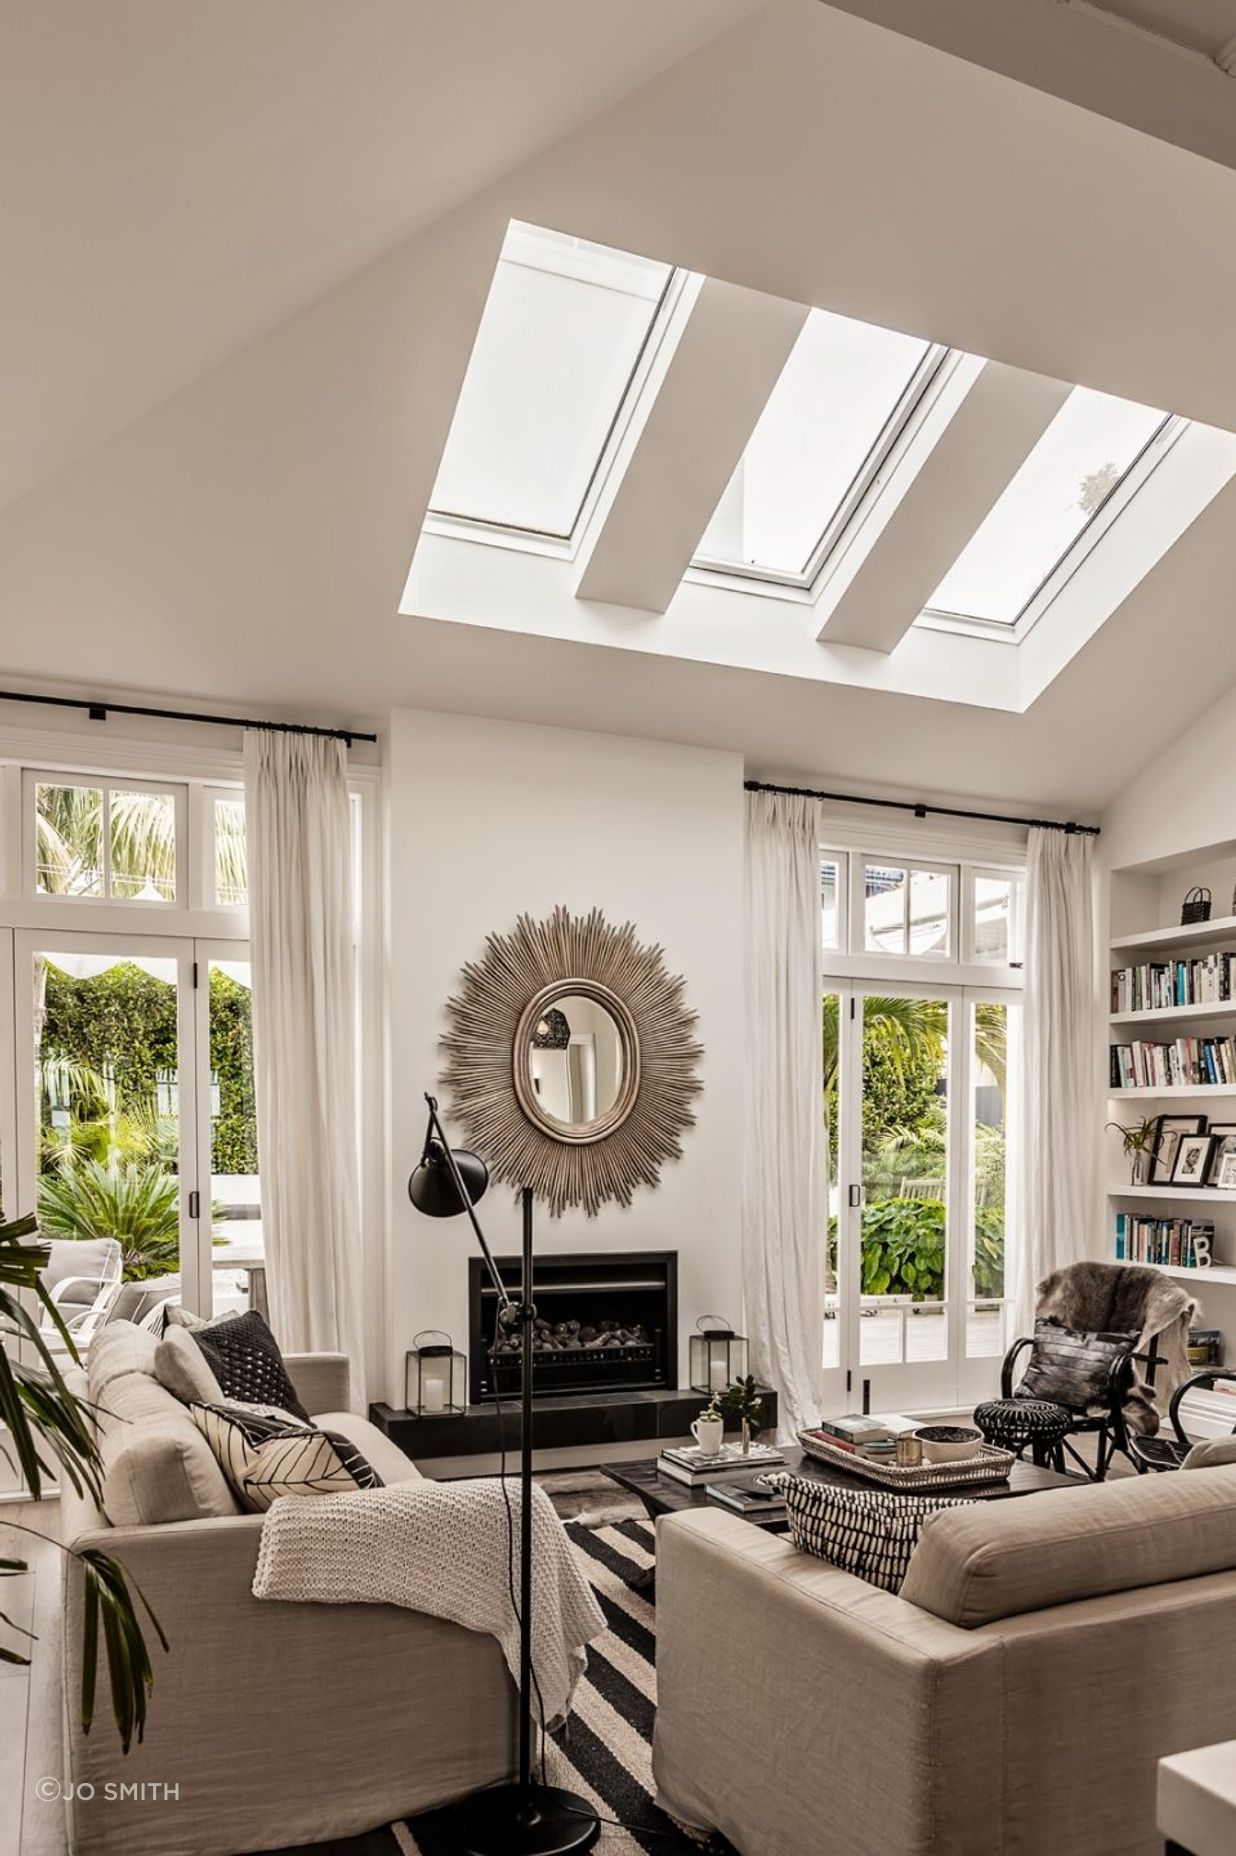 The lounge area is light and airy as a result of skylights and French doors.